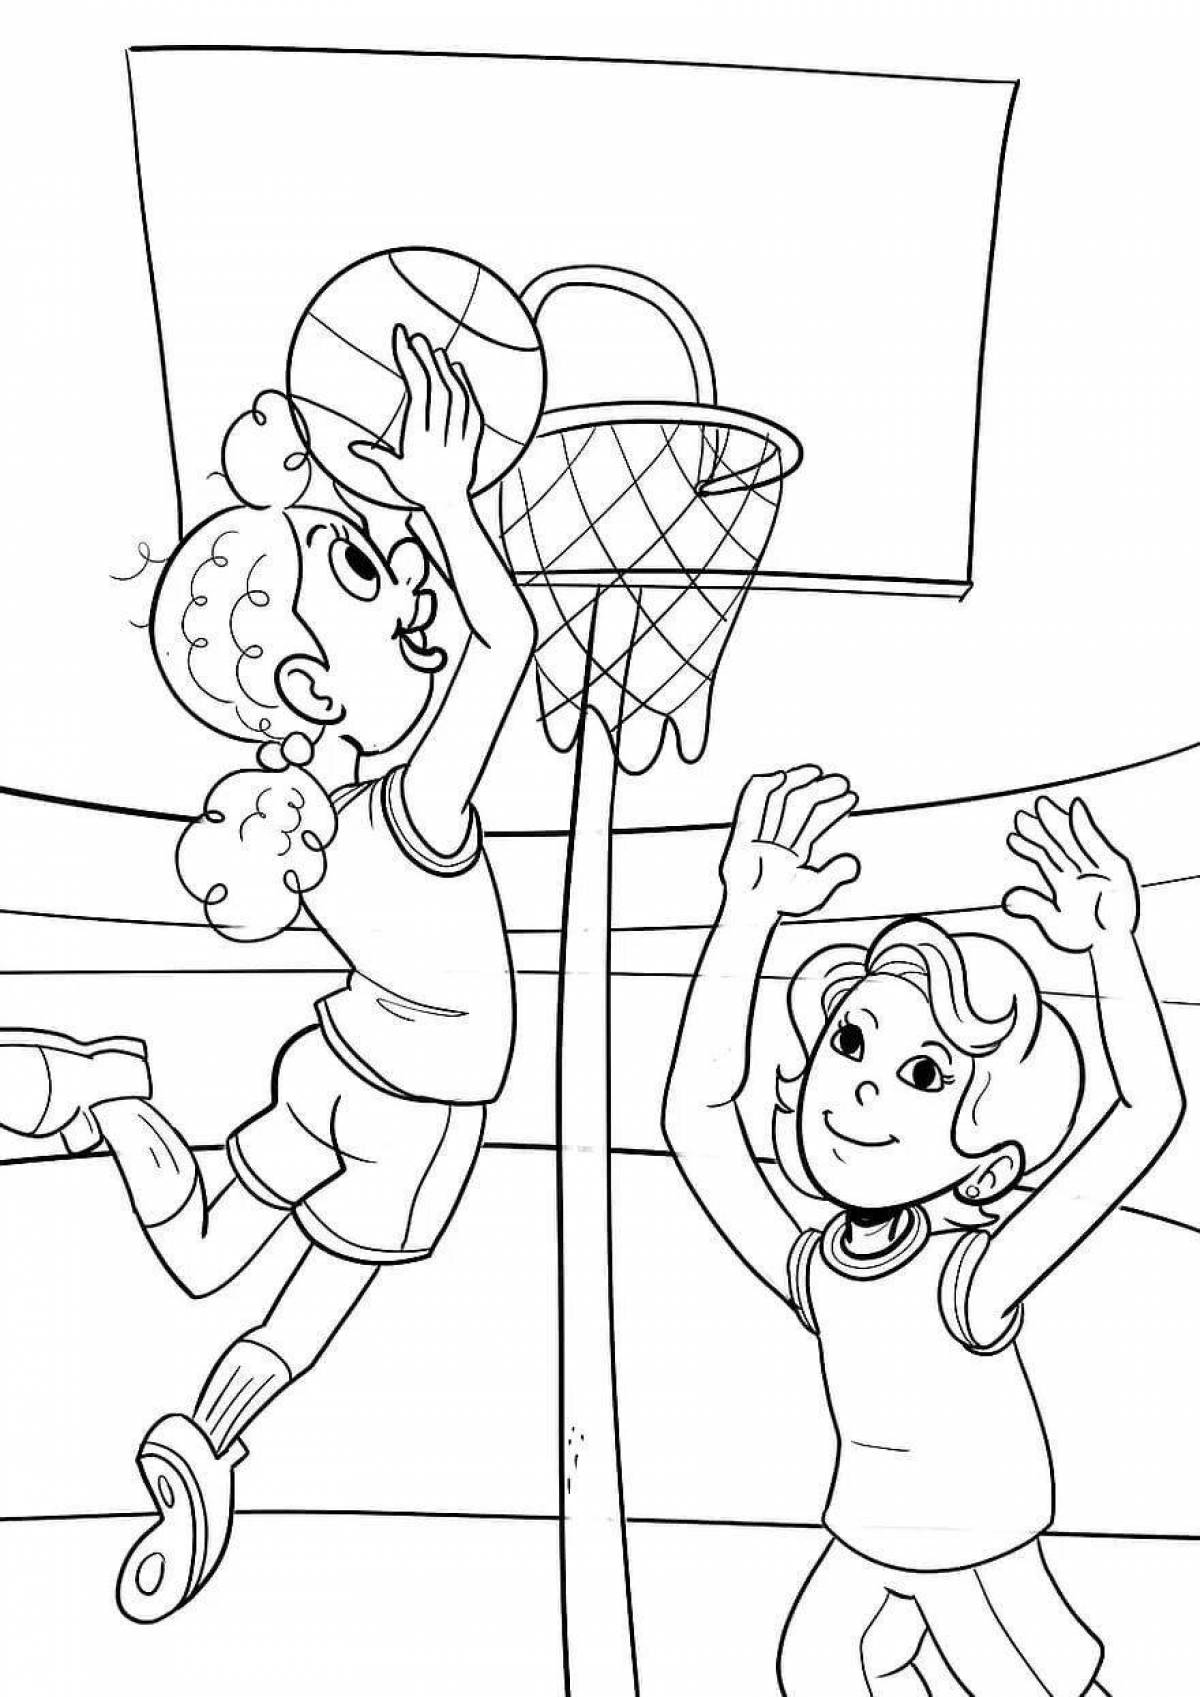 Physical education inspirational coloring book